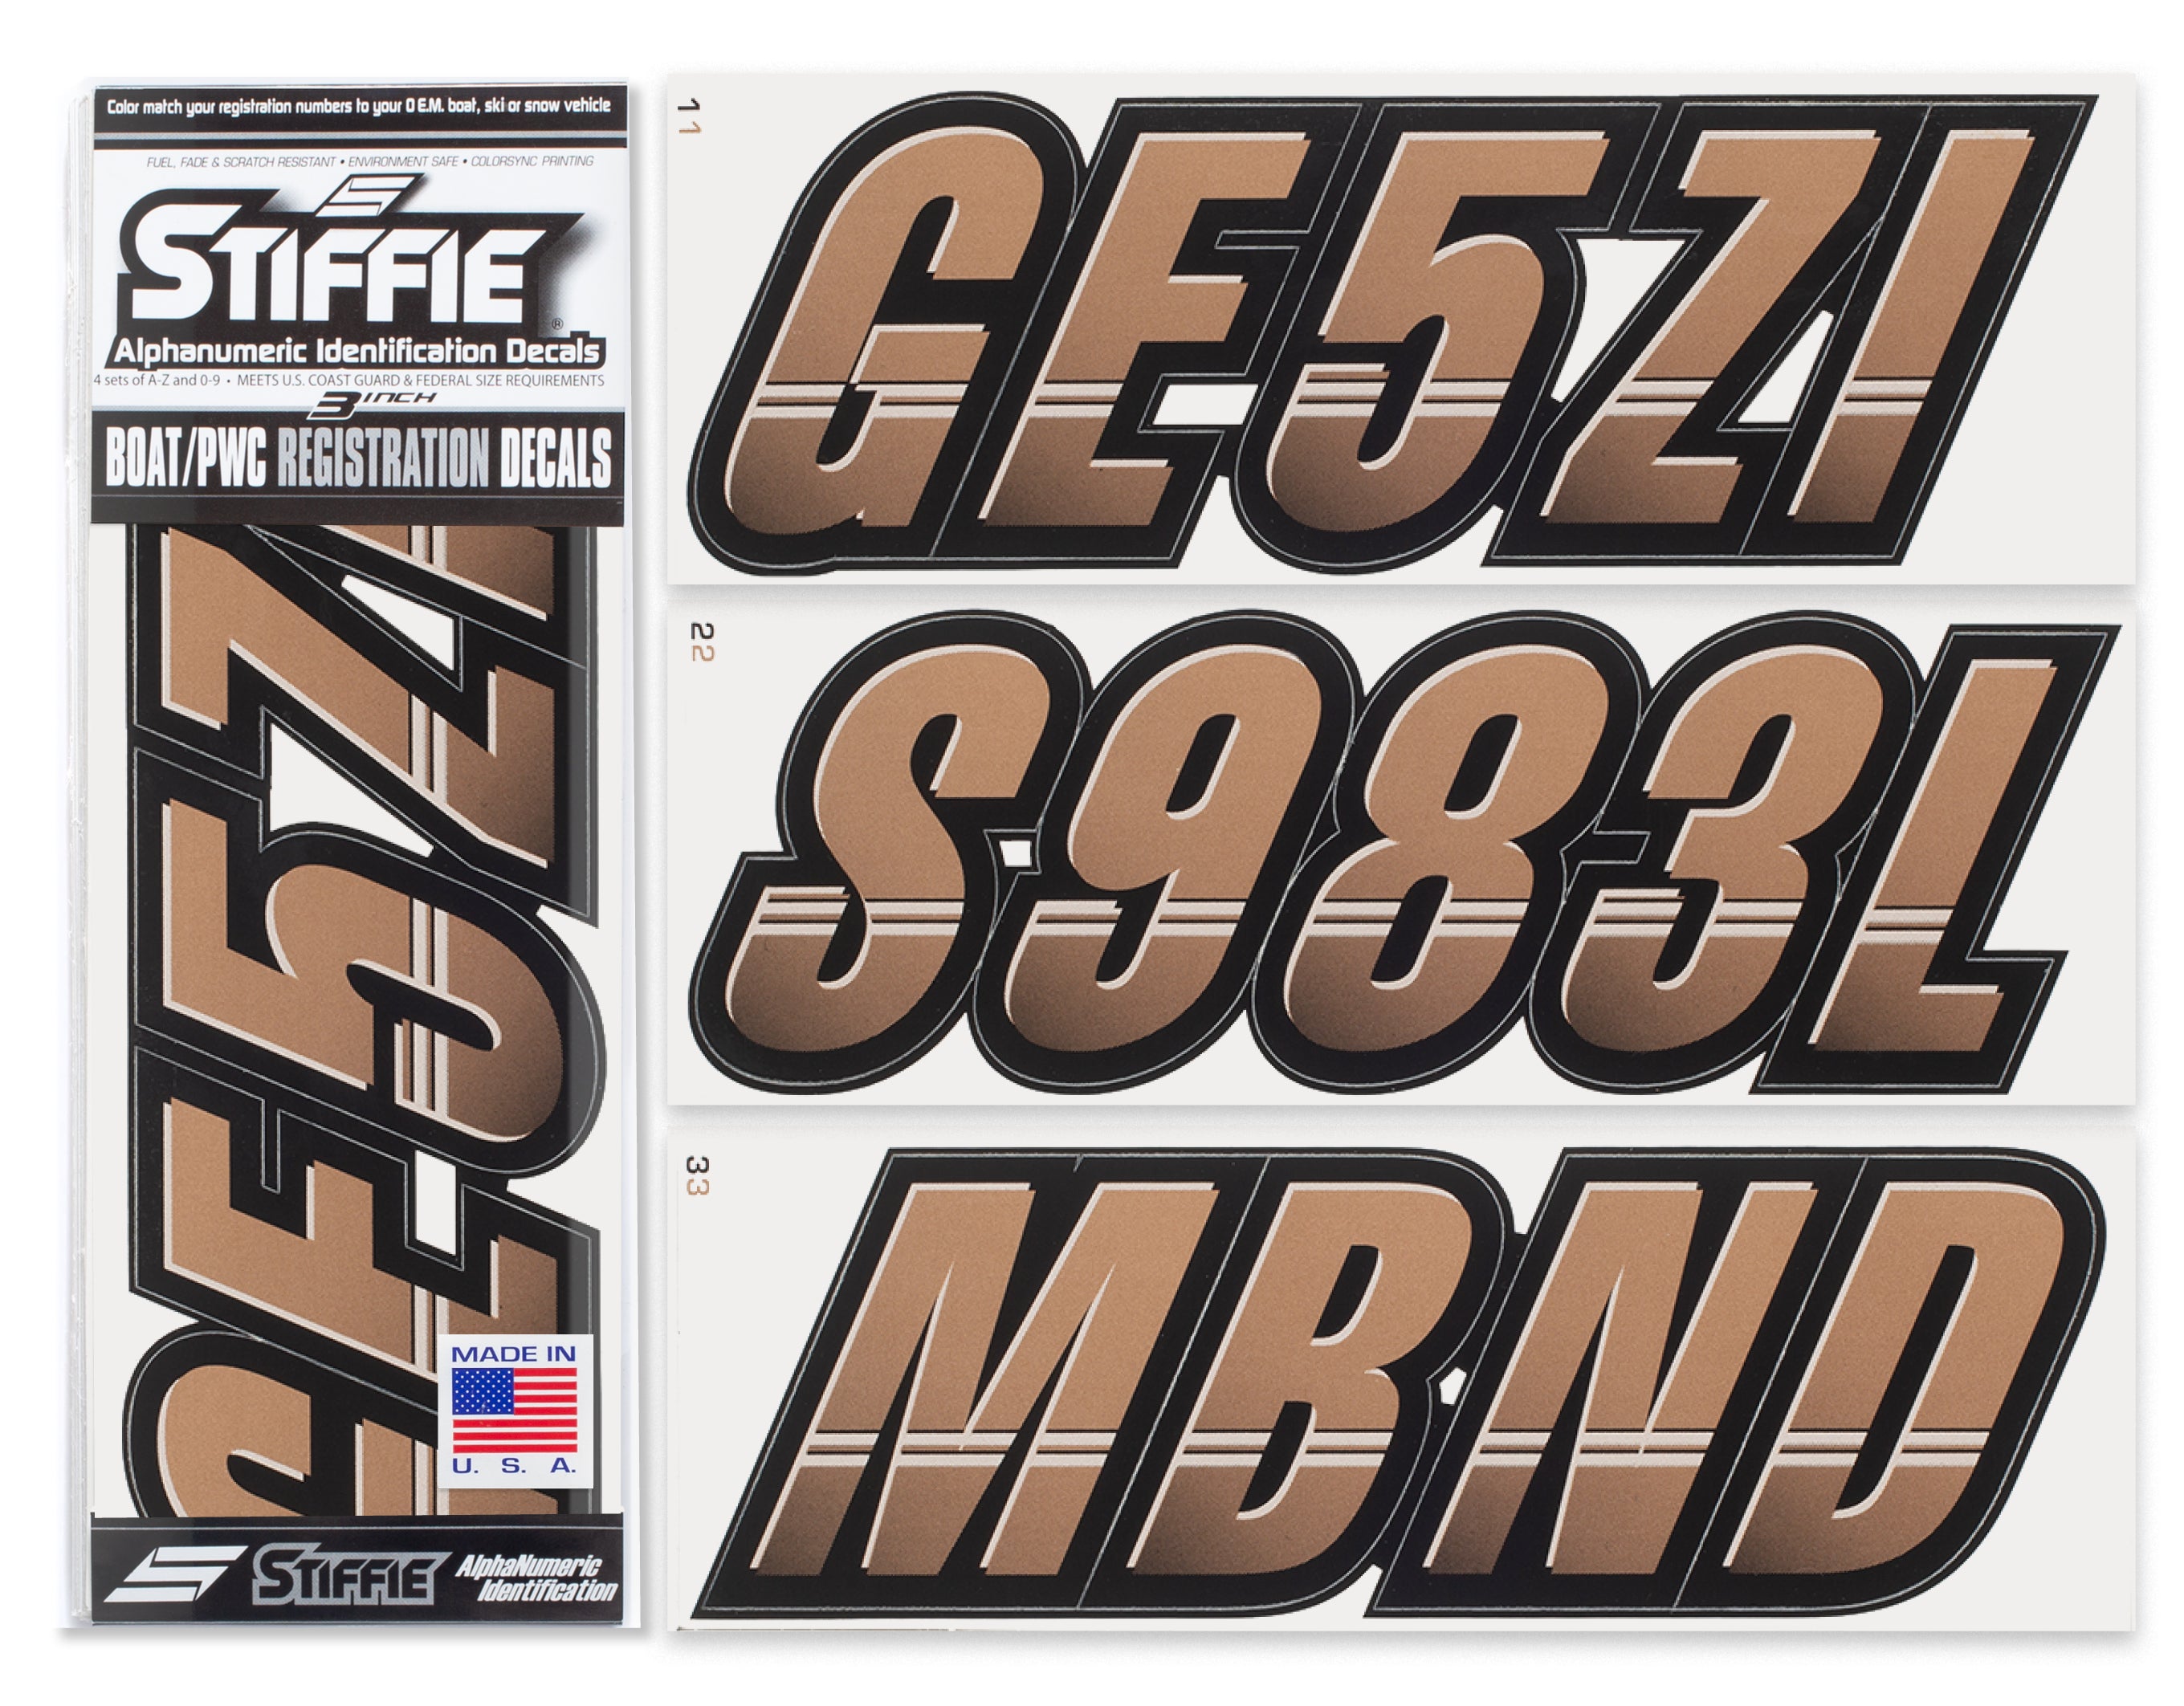 Techtron Metallic Copper/Black 3" Alpha-Numeric Registration Identification Numbers Stickers Decals for Boats & Personal Watercraft